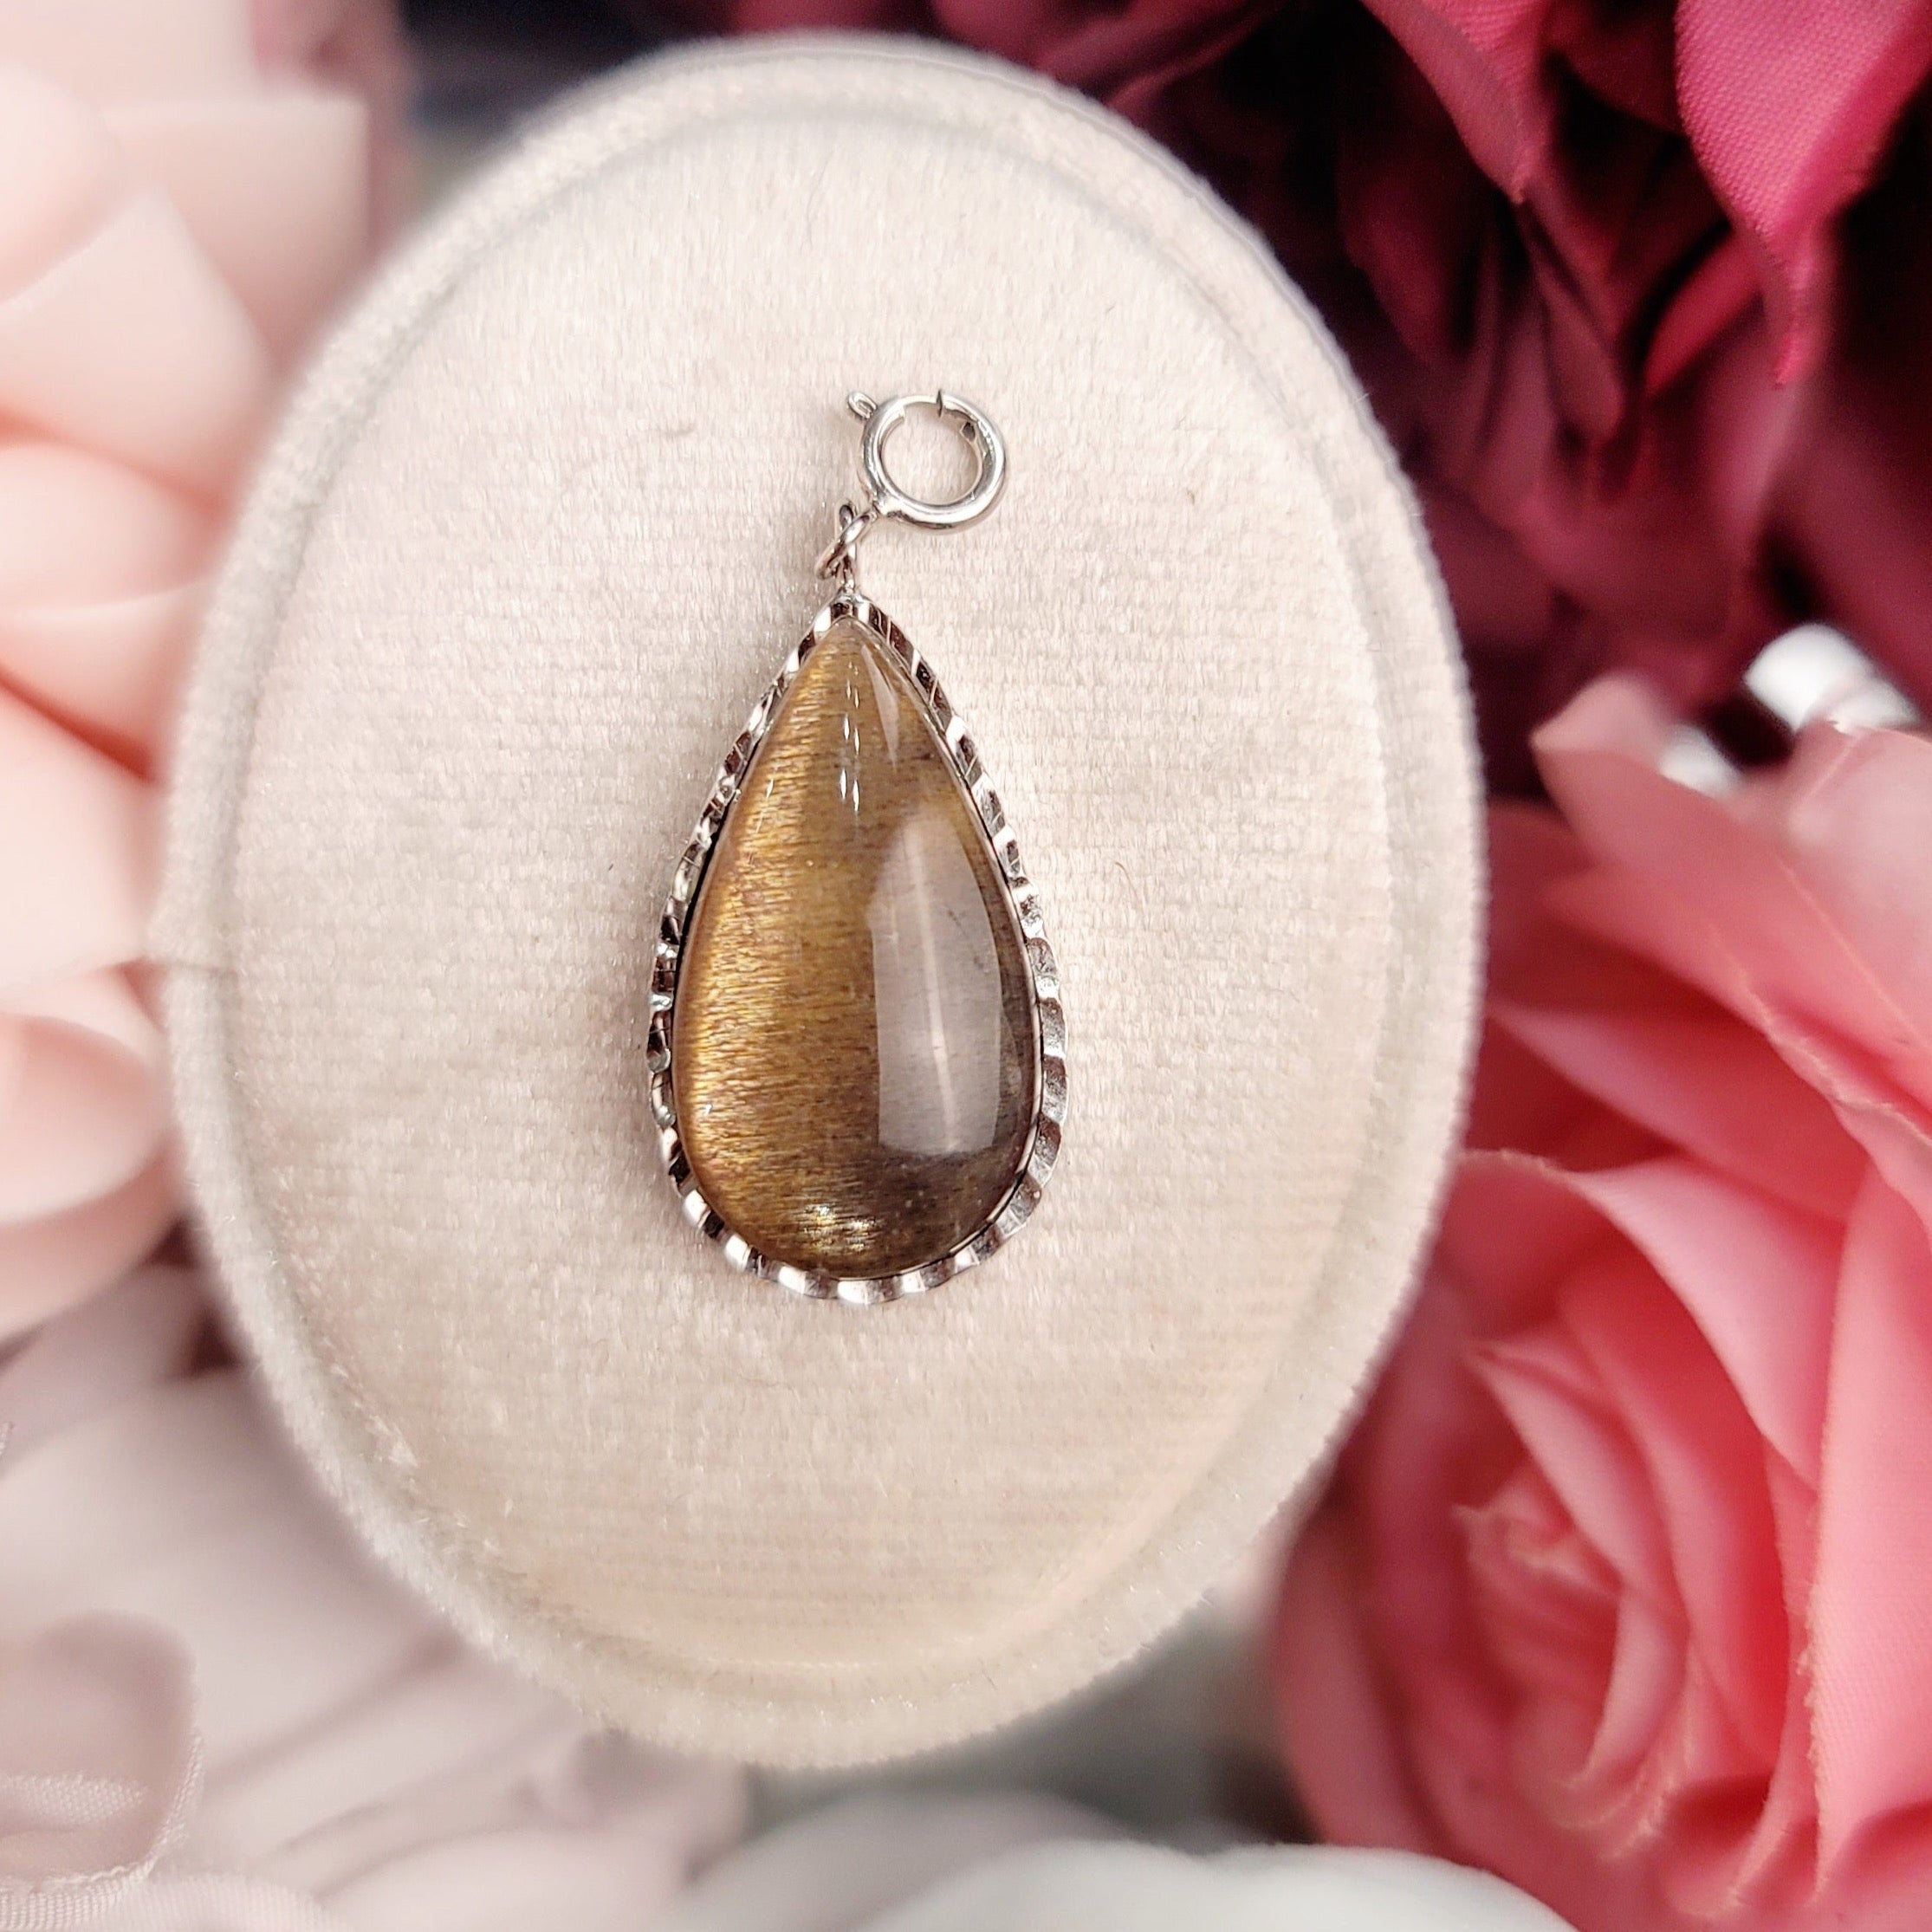 Black Moonstone Pendant .925 Silver for New Beginnings and Protection